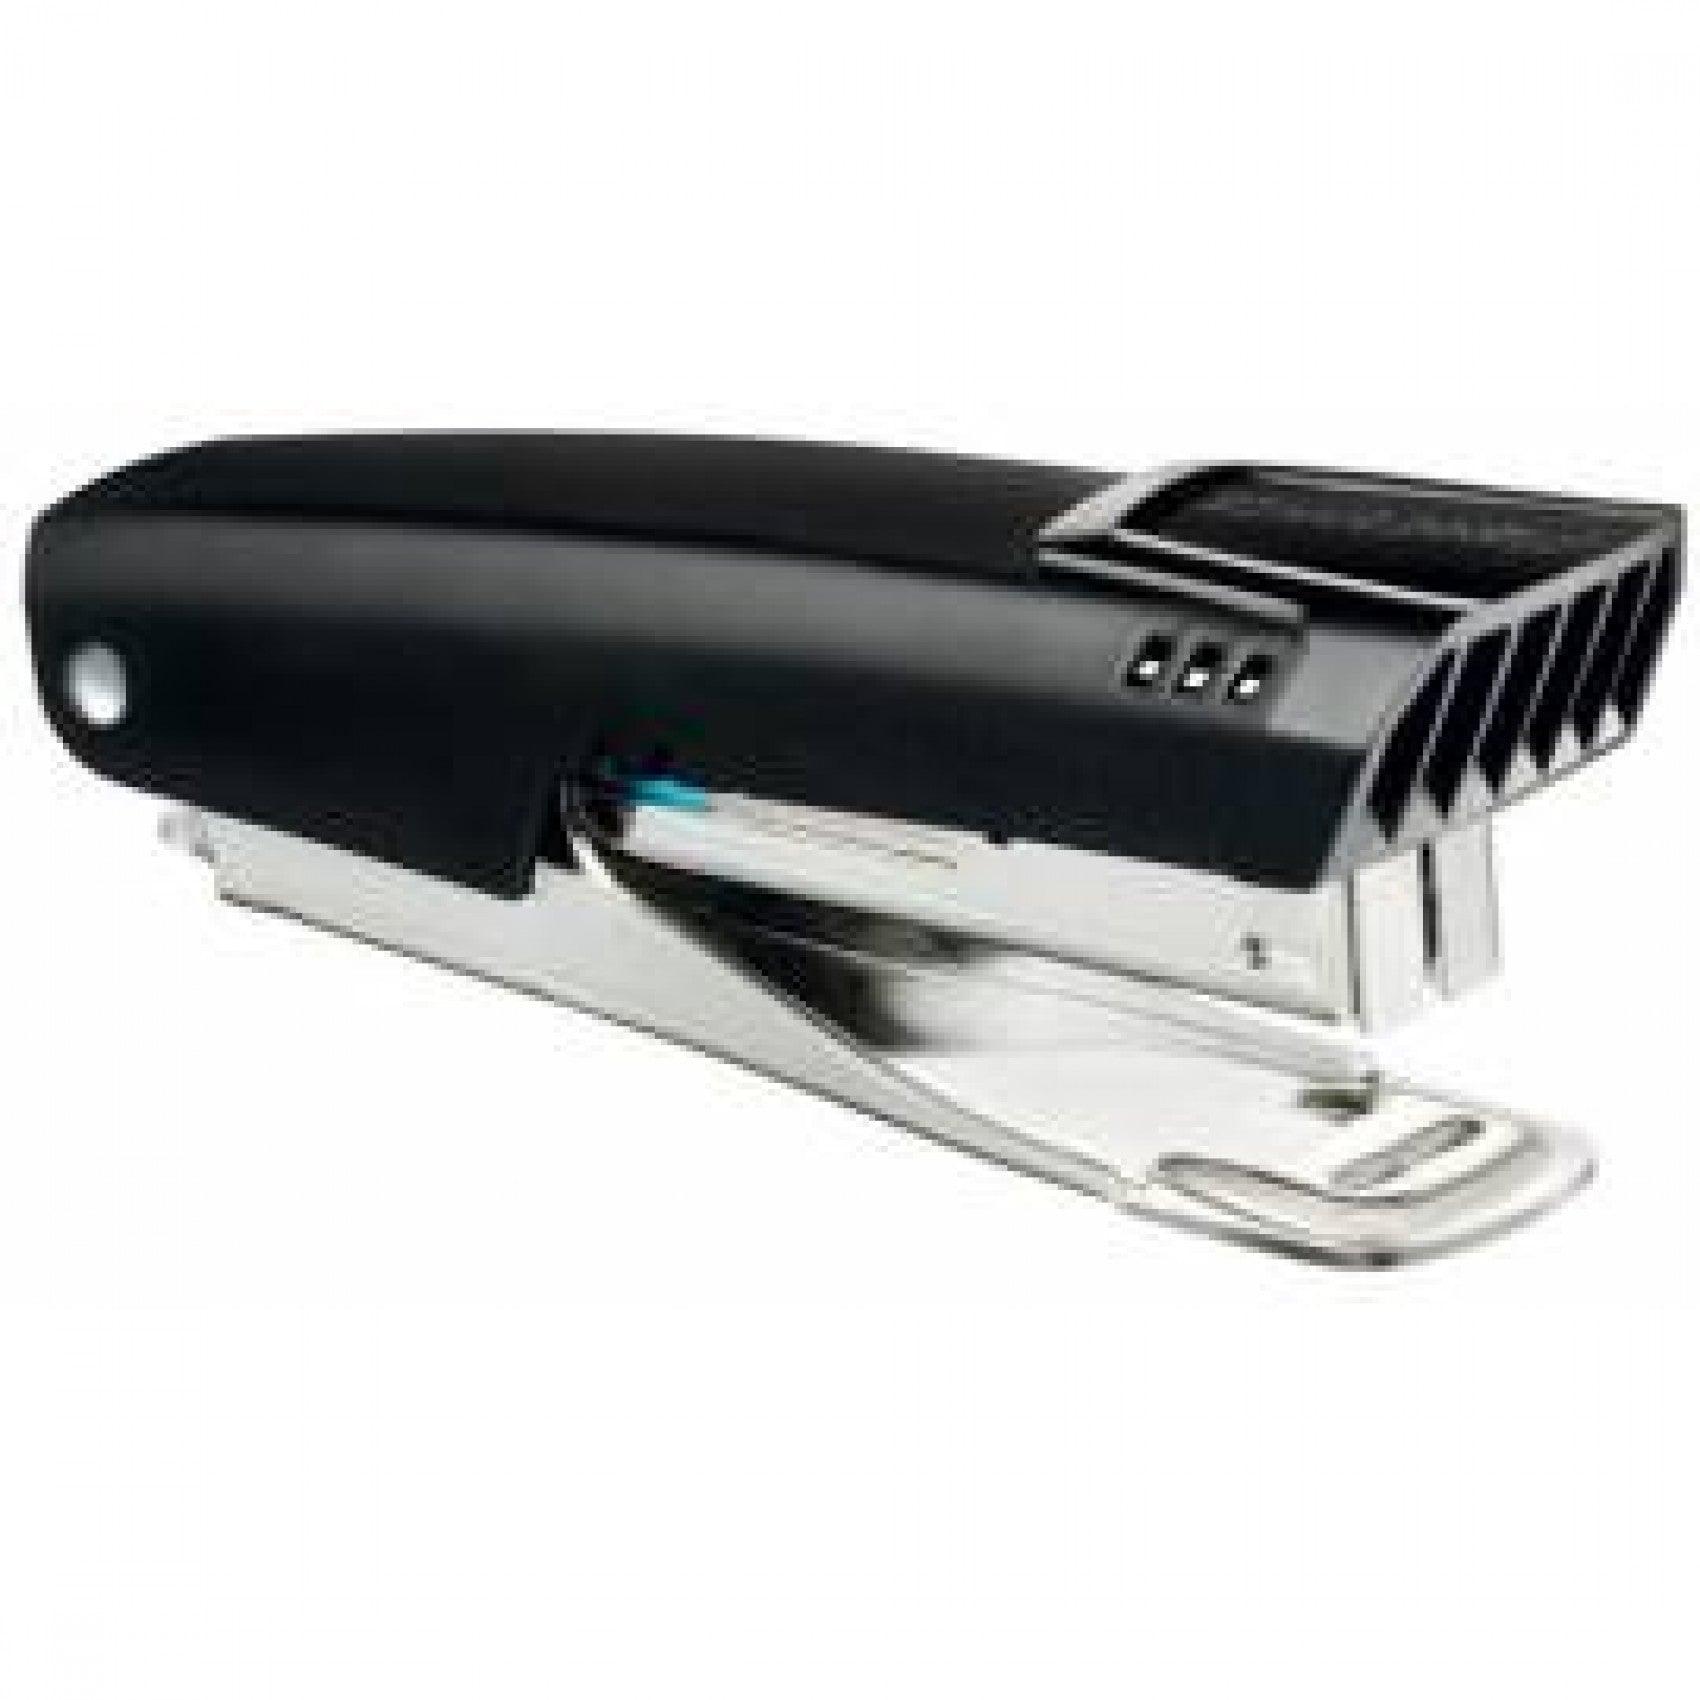 Maped Stapler N10 Essentials Black / 526112 - Karout Online -Karout Online Shopping In lebanon - Karout Express Delivery 